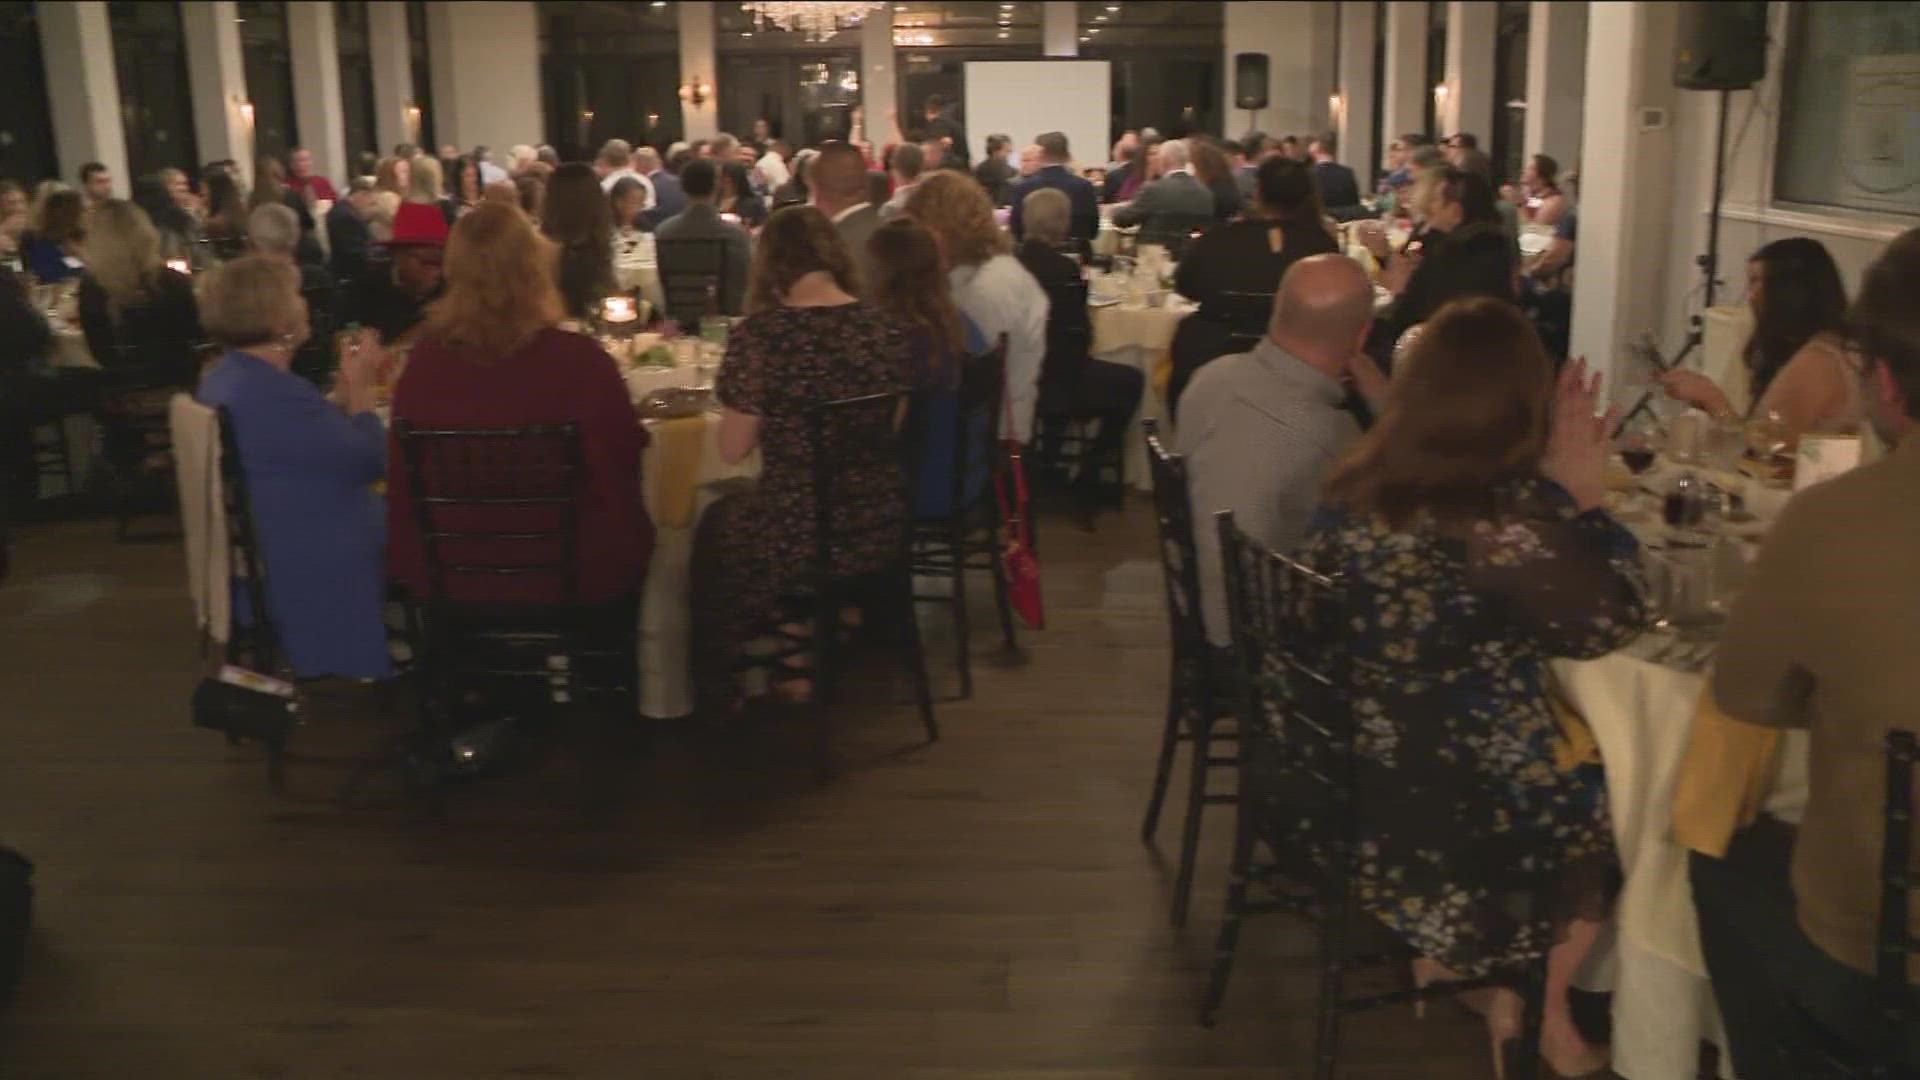 Compass House held its Golden Anniversary dinner and fundraiser Friday, honoring past workers and partners.